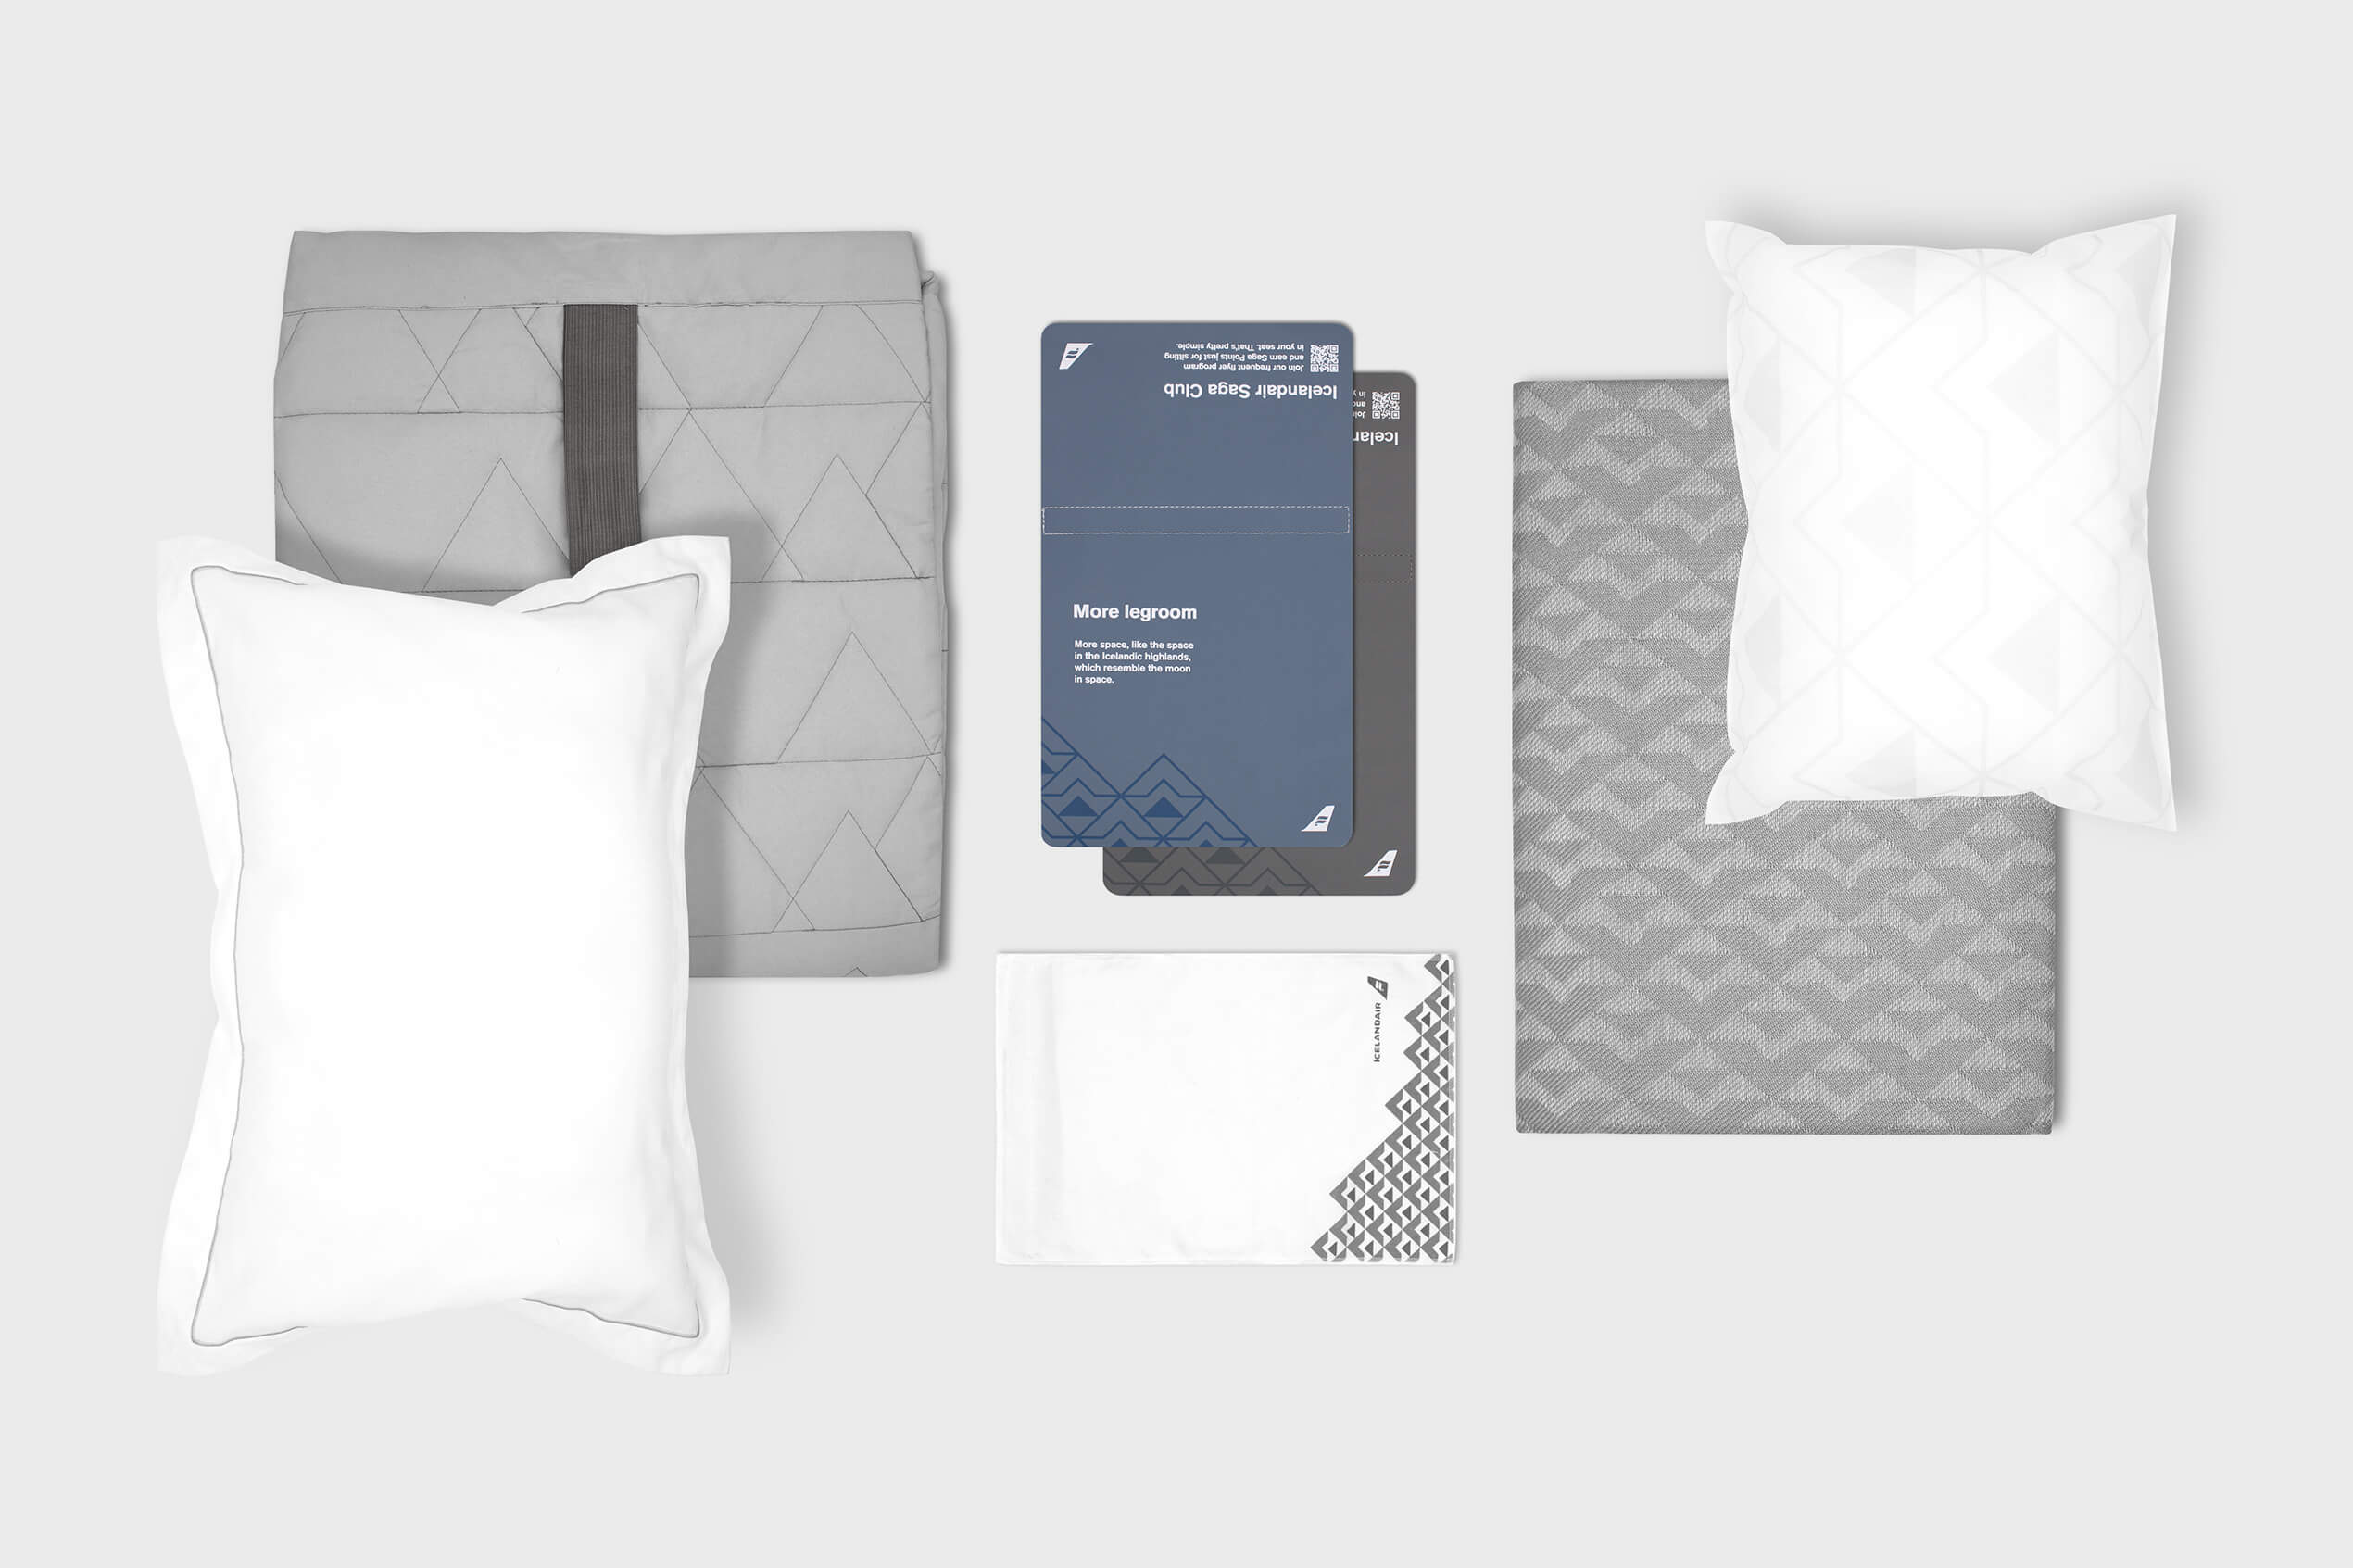 The new Icelandair textile collection showing pillows, blankets and more in a grey and white colour pallette